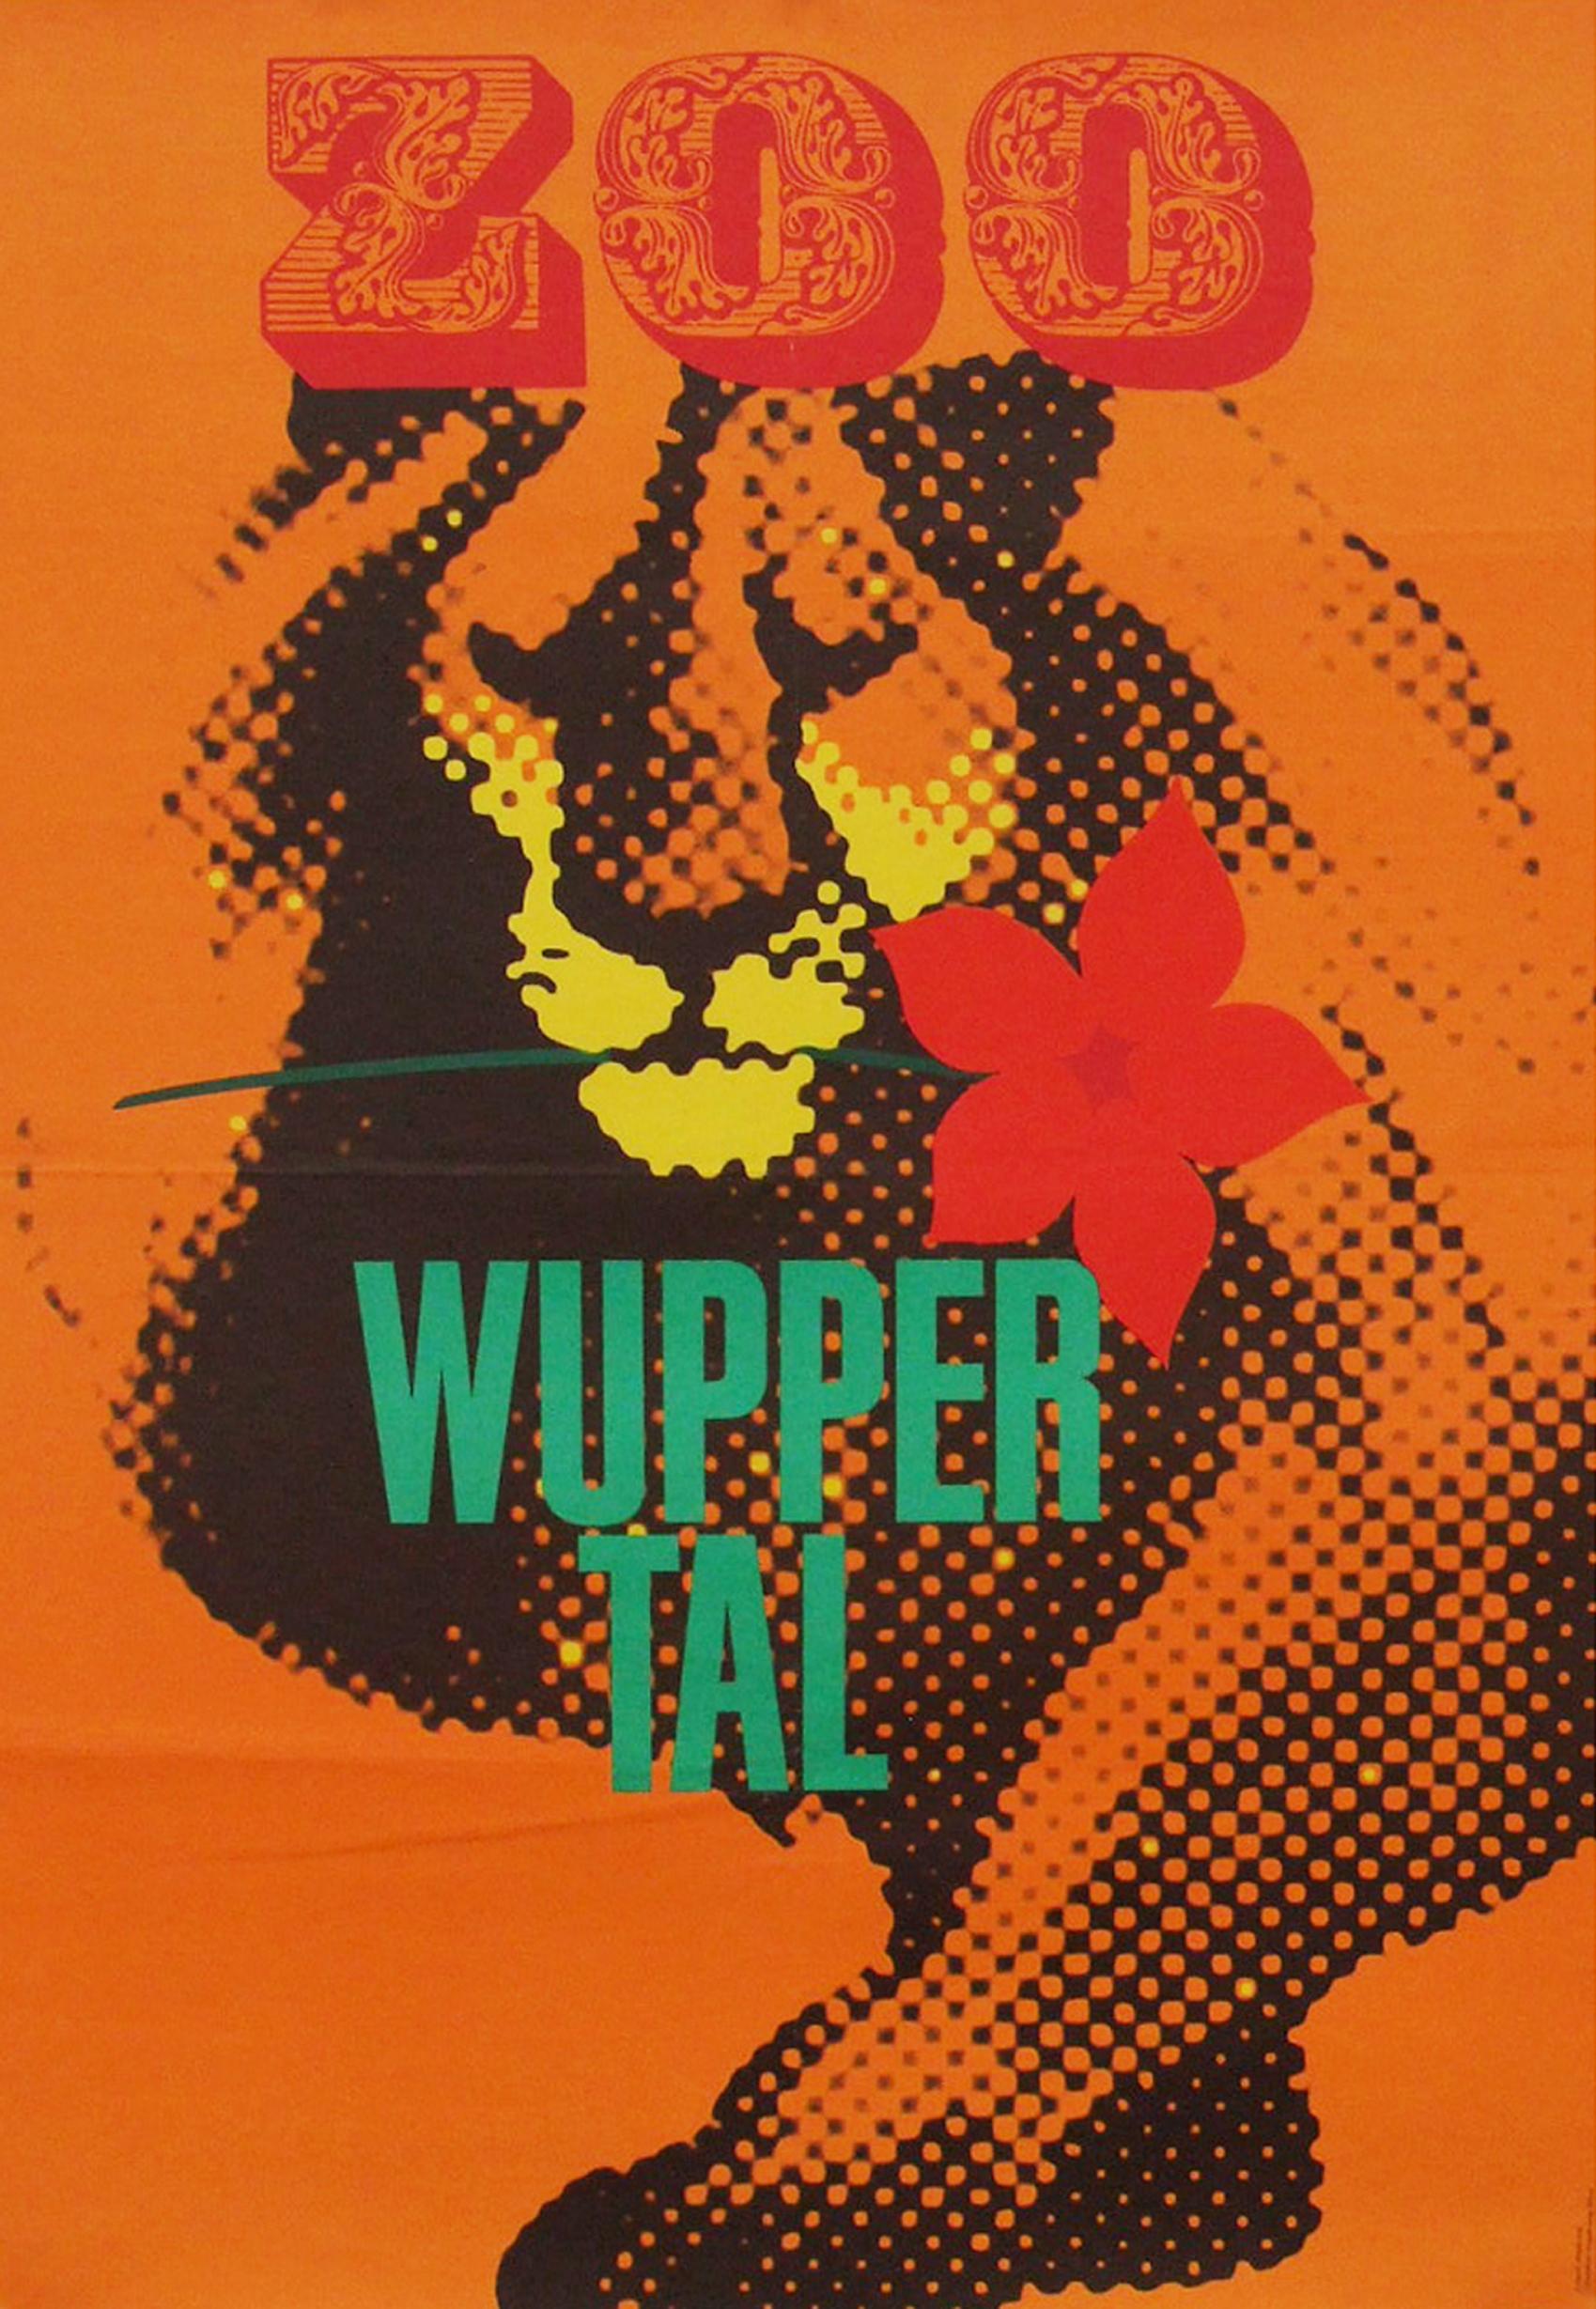 Original 1963 promotional poster for Wuppertal Zoo designed by Atelier Ade.

First edition color offset lithograph.

Folded as originally issued.

Measures: L 84cm x W 59.5cm.